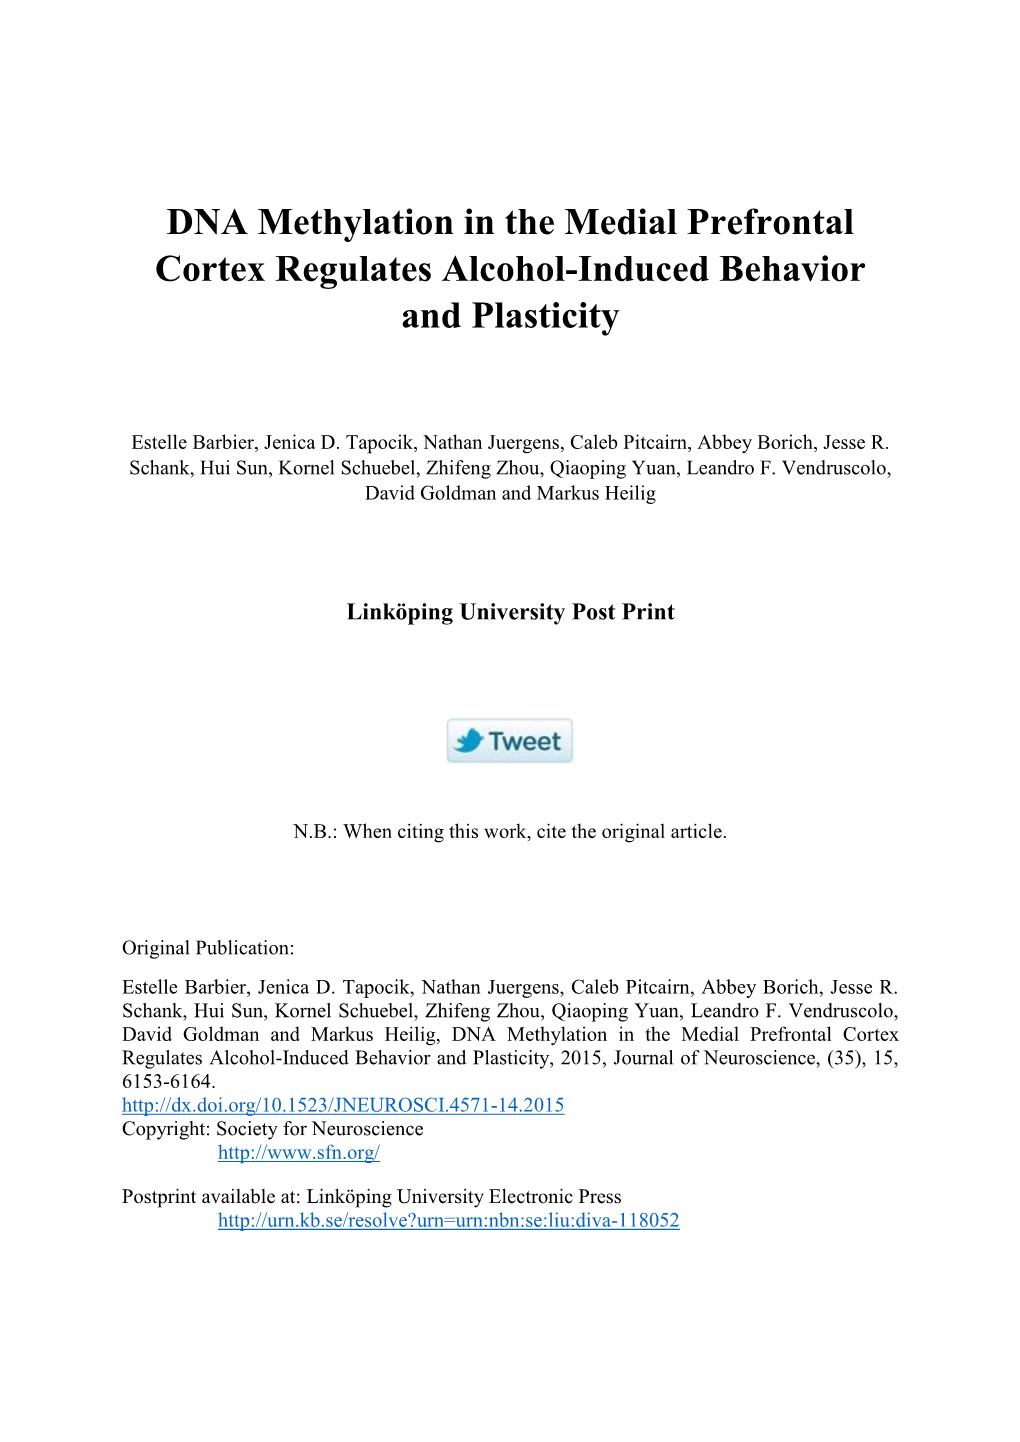 DNA Methylation in the Medial Prefrontal Cortex Regulates Alcohol-Induced Behavior and Plasticity